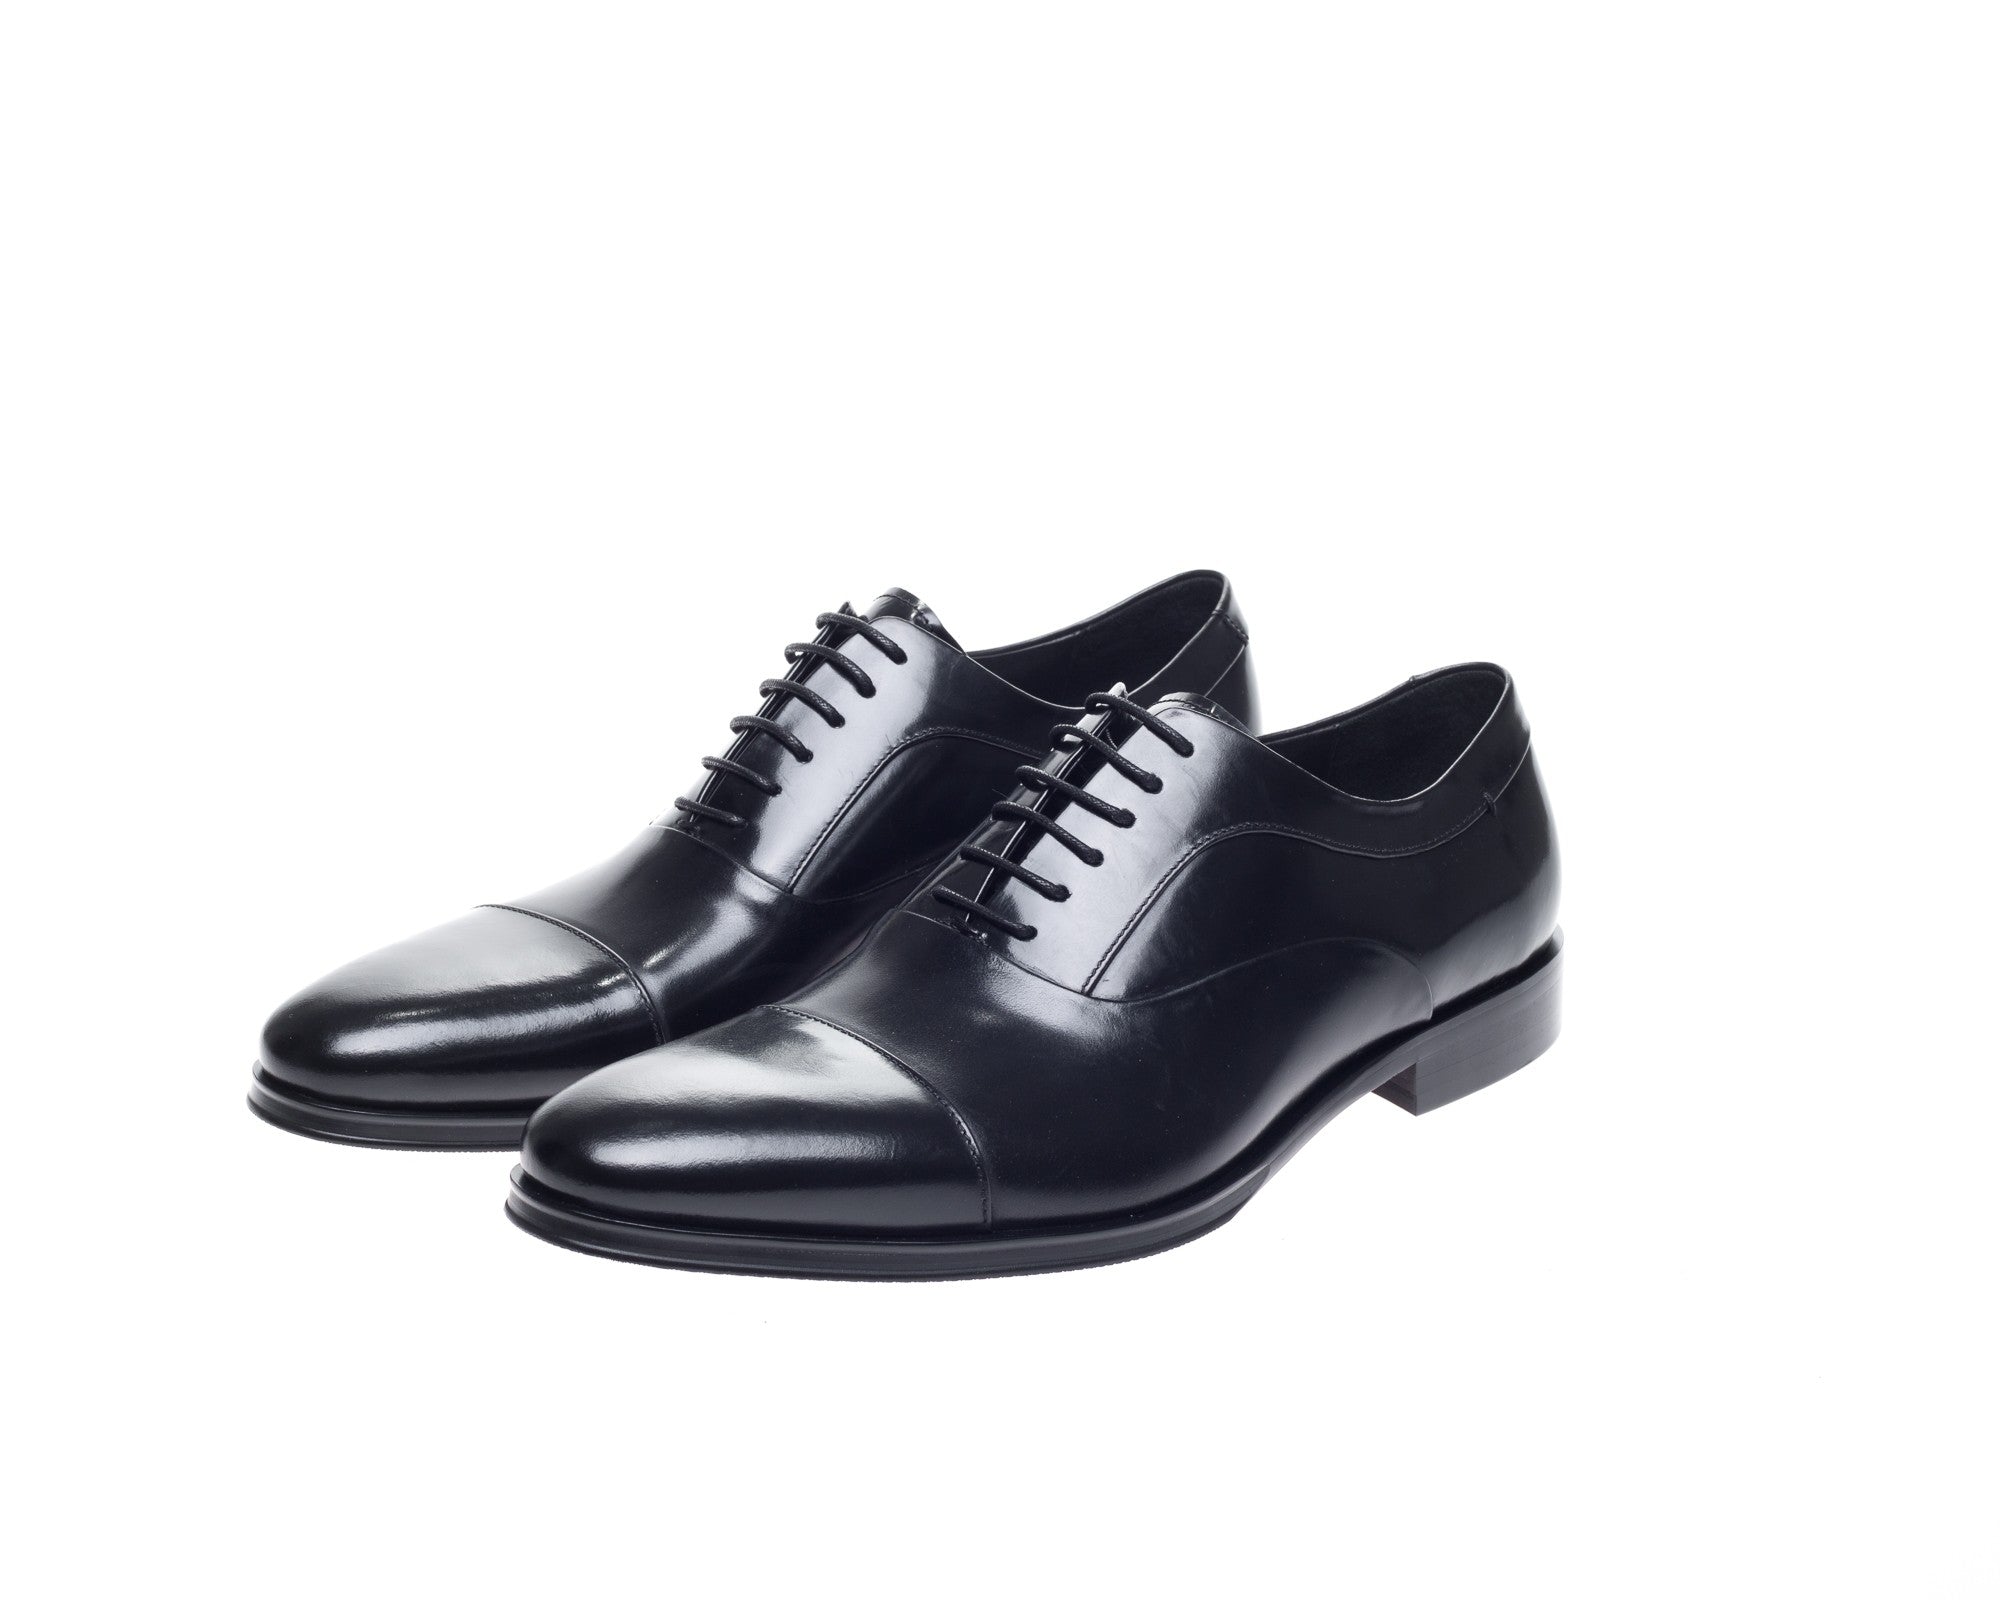 John White Black Guildhall Capped Oxford Shoes